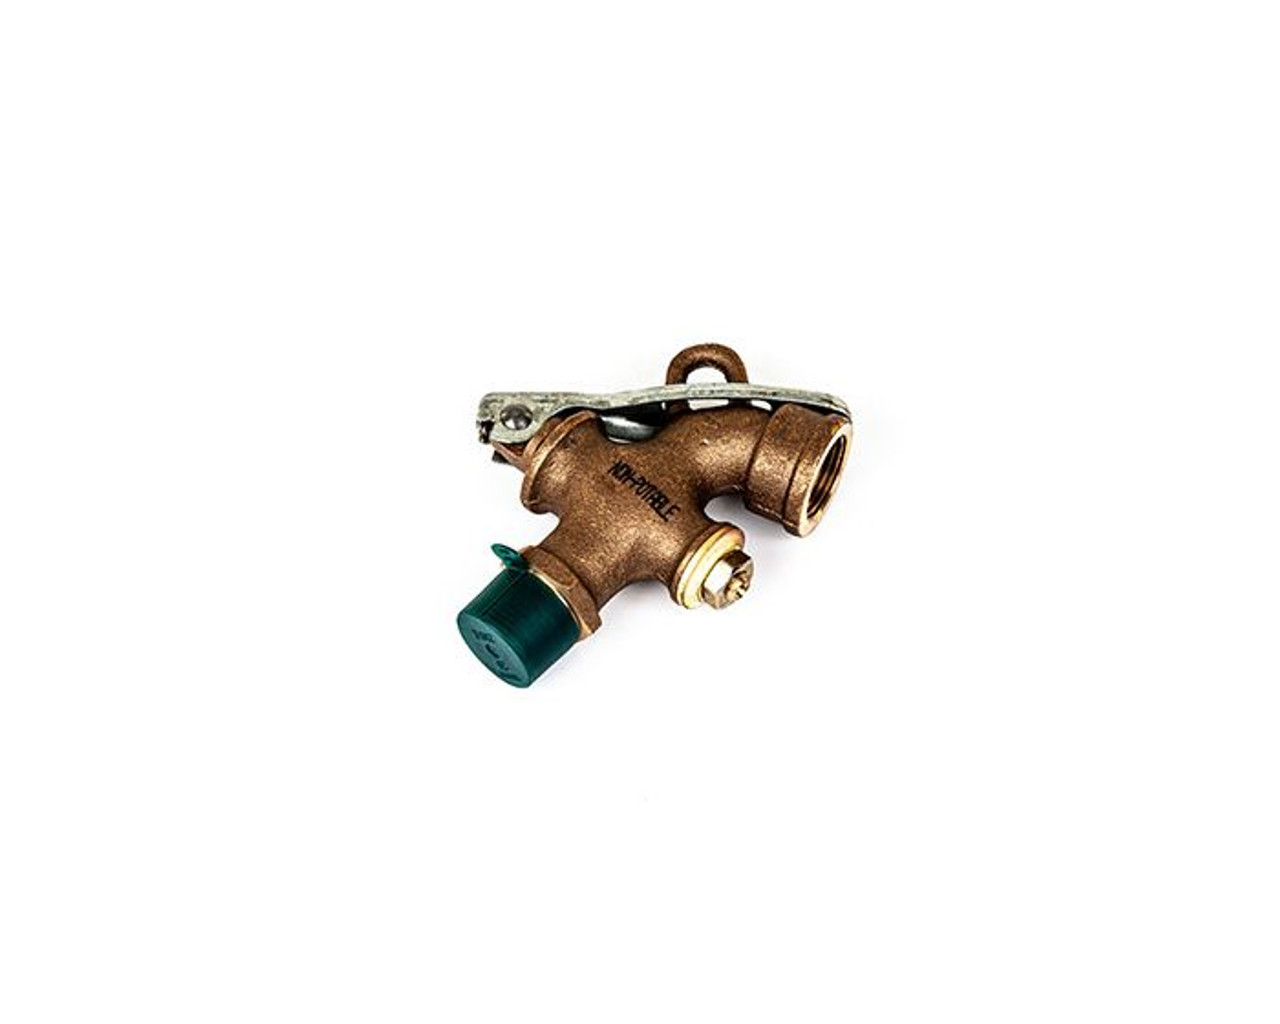 SOLID BRASS DRUM FAUCET - 3/4 INCH NPT INLET - 3/4 INCH NPT FEMALE OUTLET